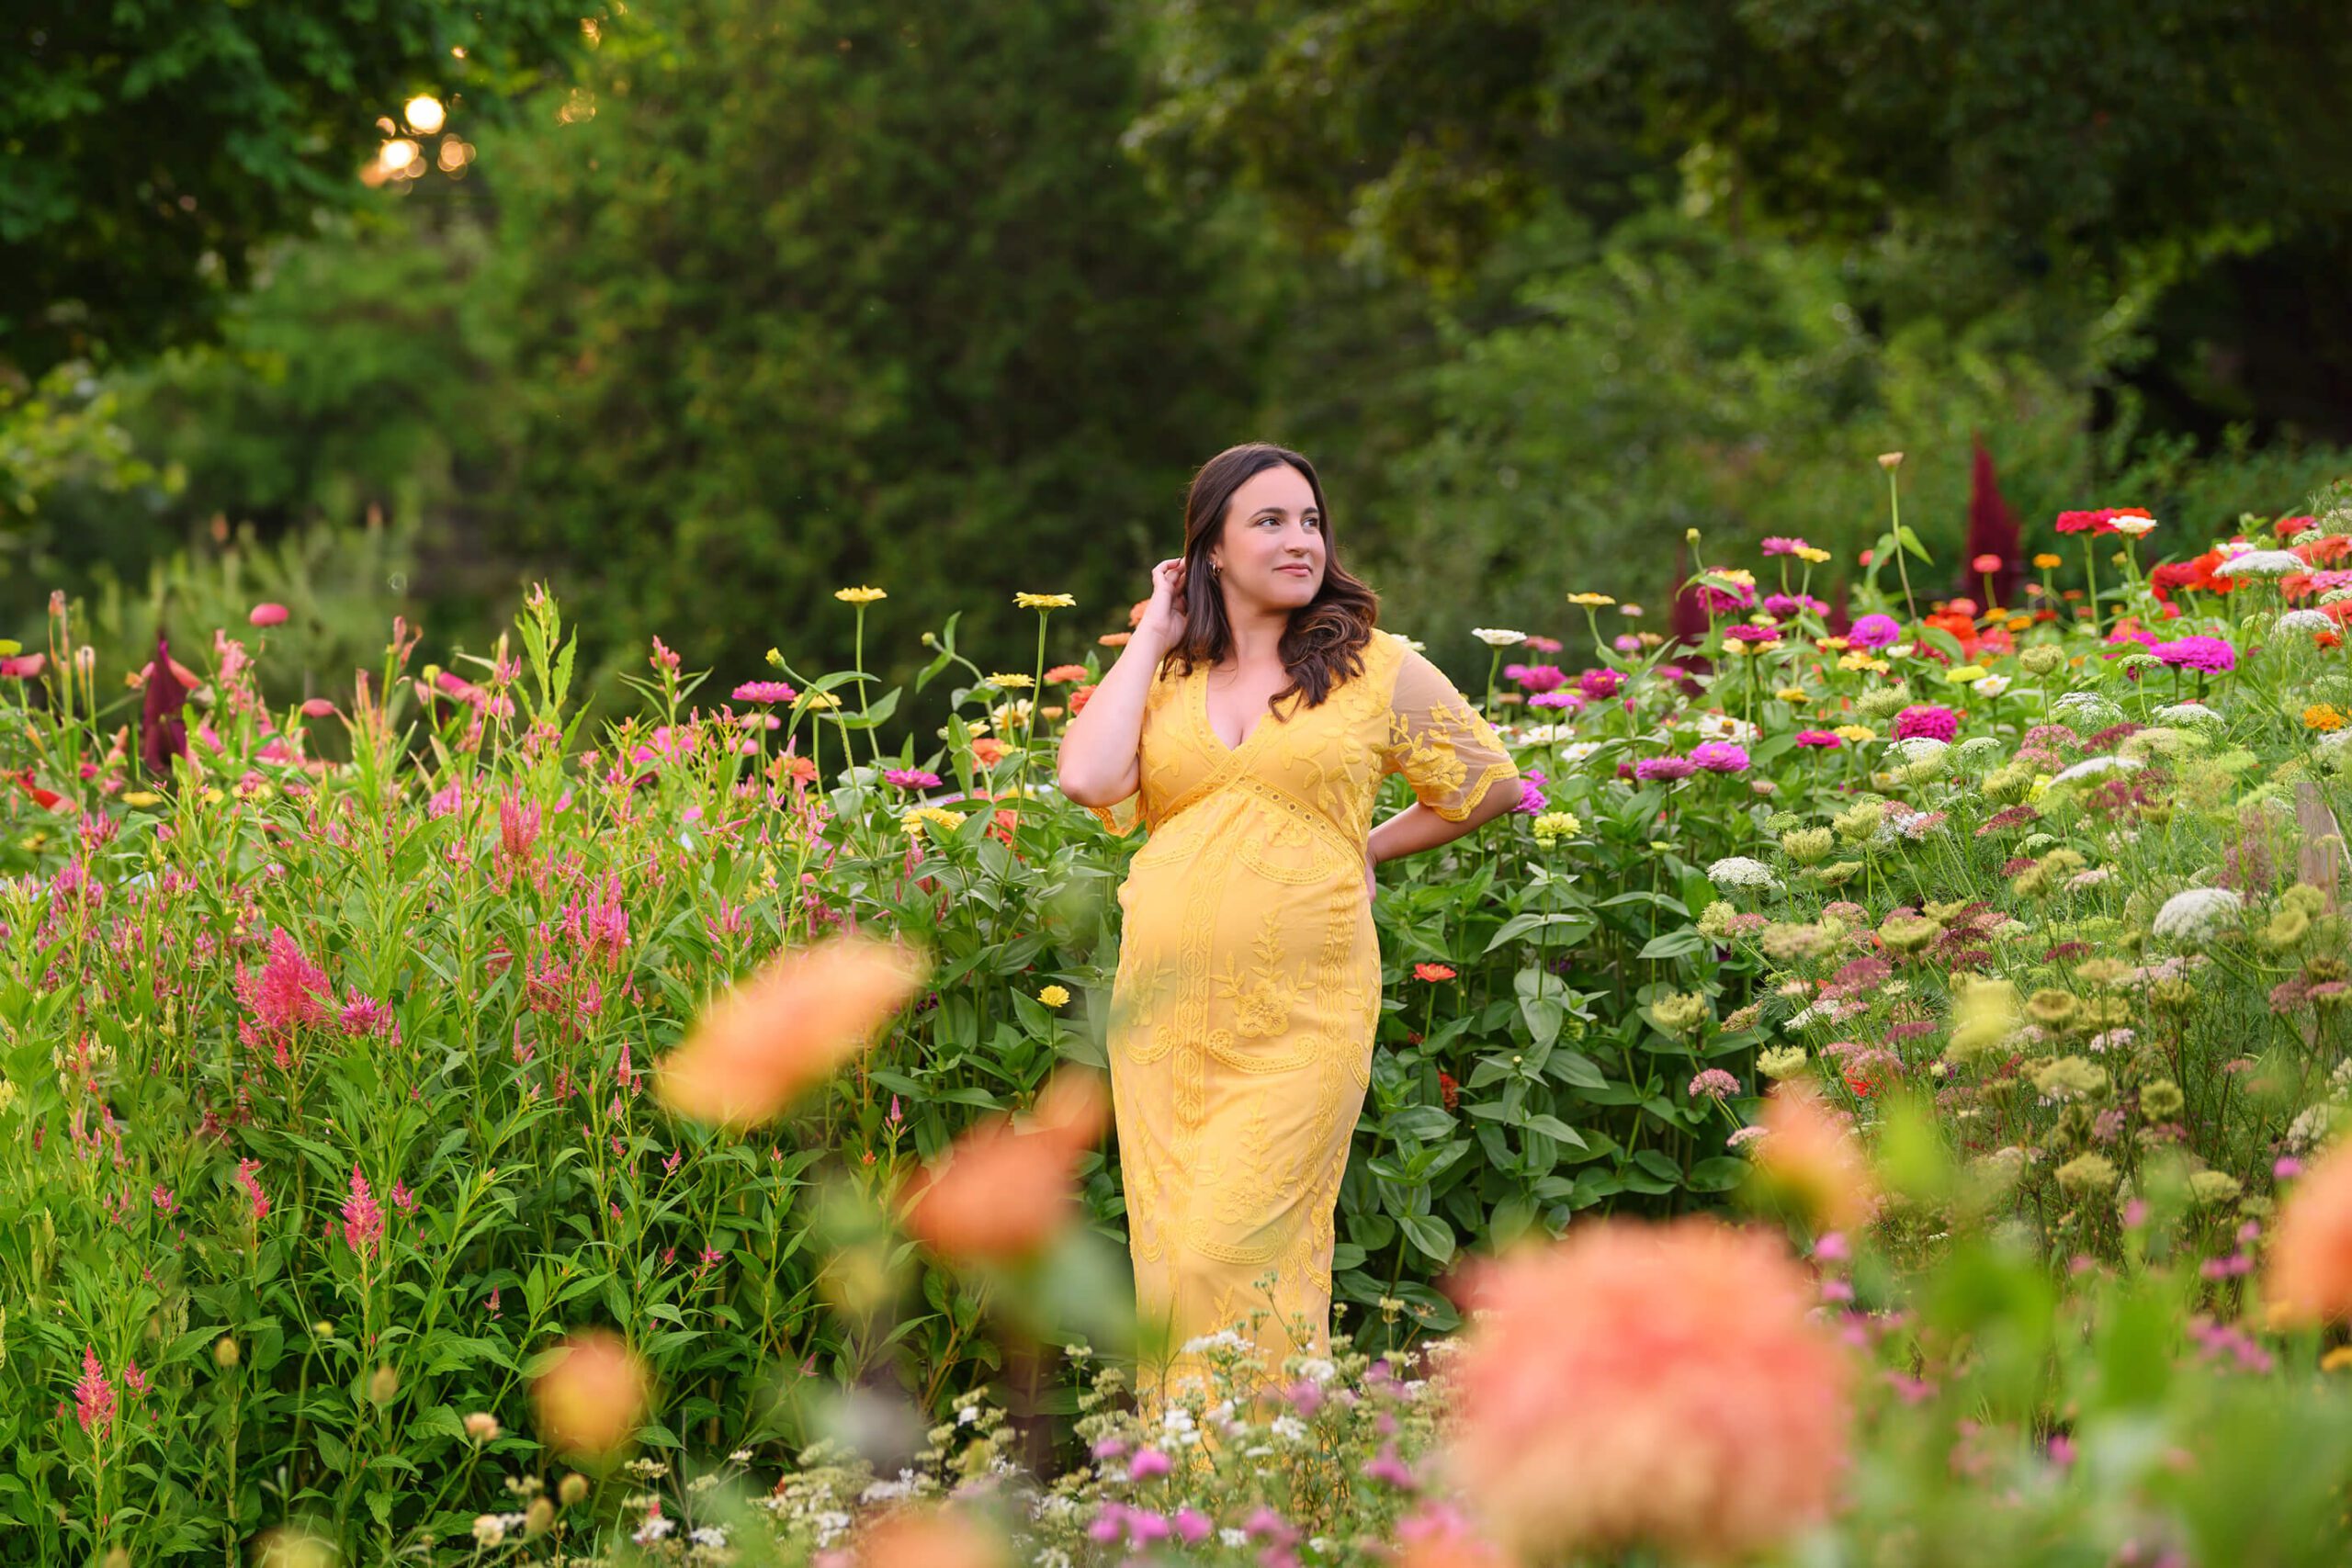 mom to be with her hand in her hair in a yellow dress amongst the flowers